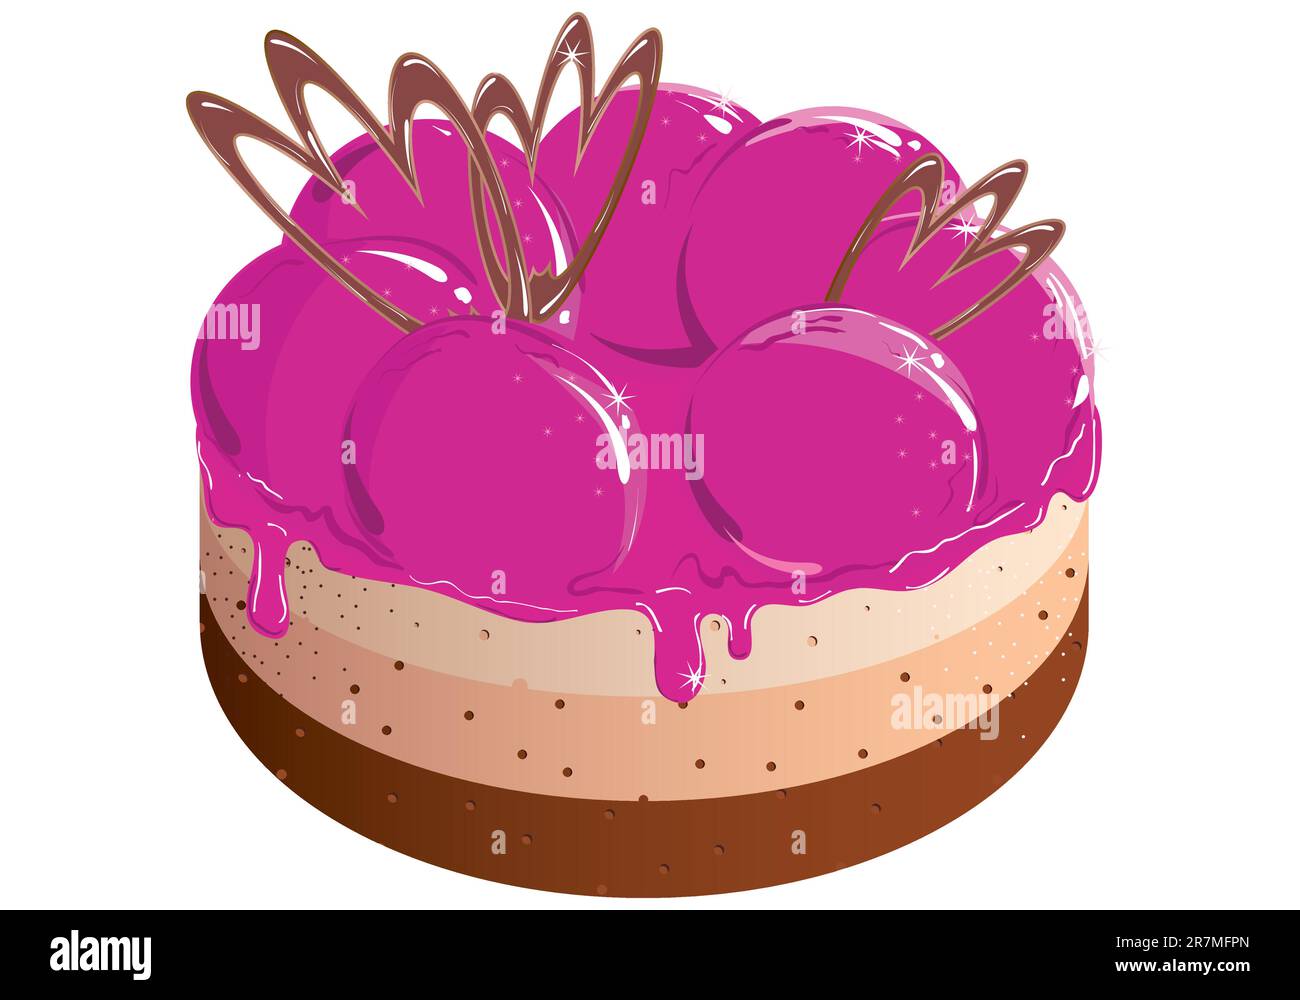 Painted pink cake with berry jam. Vector illustration Stock Vector